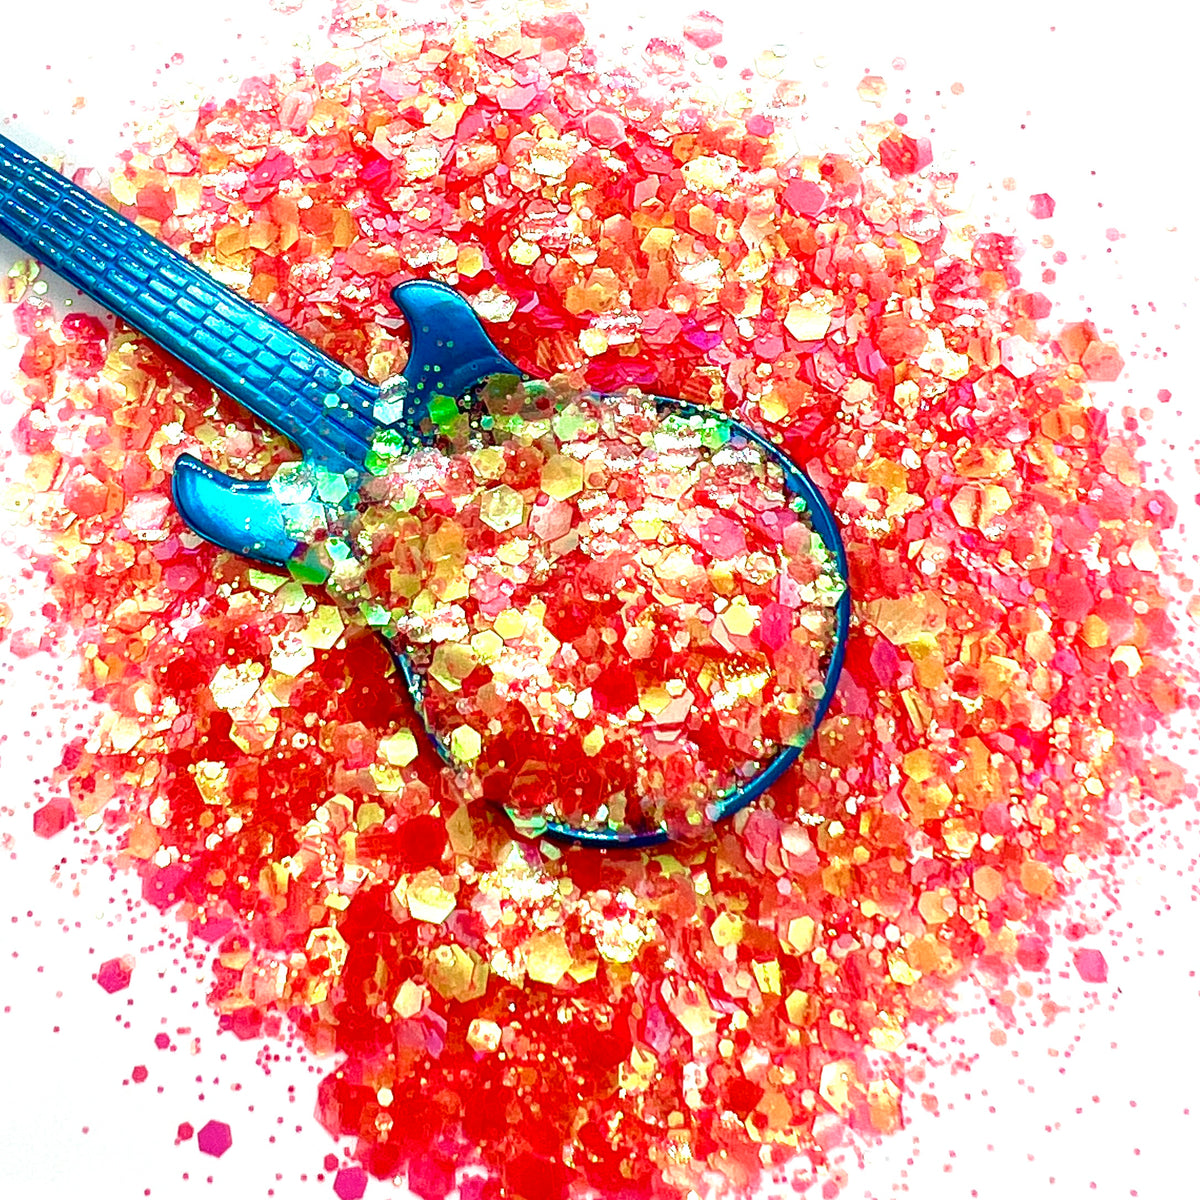 Ruby Red Grapefruit Premium Pixie for Poxy Iridescent Chunky Glitter Mix